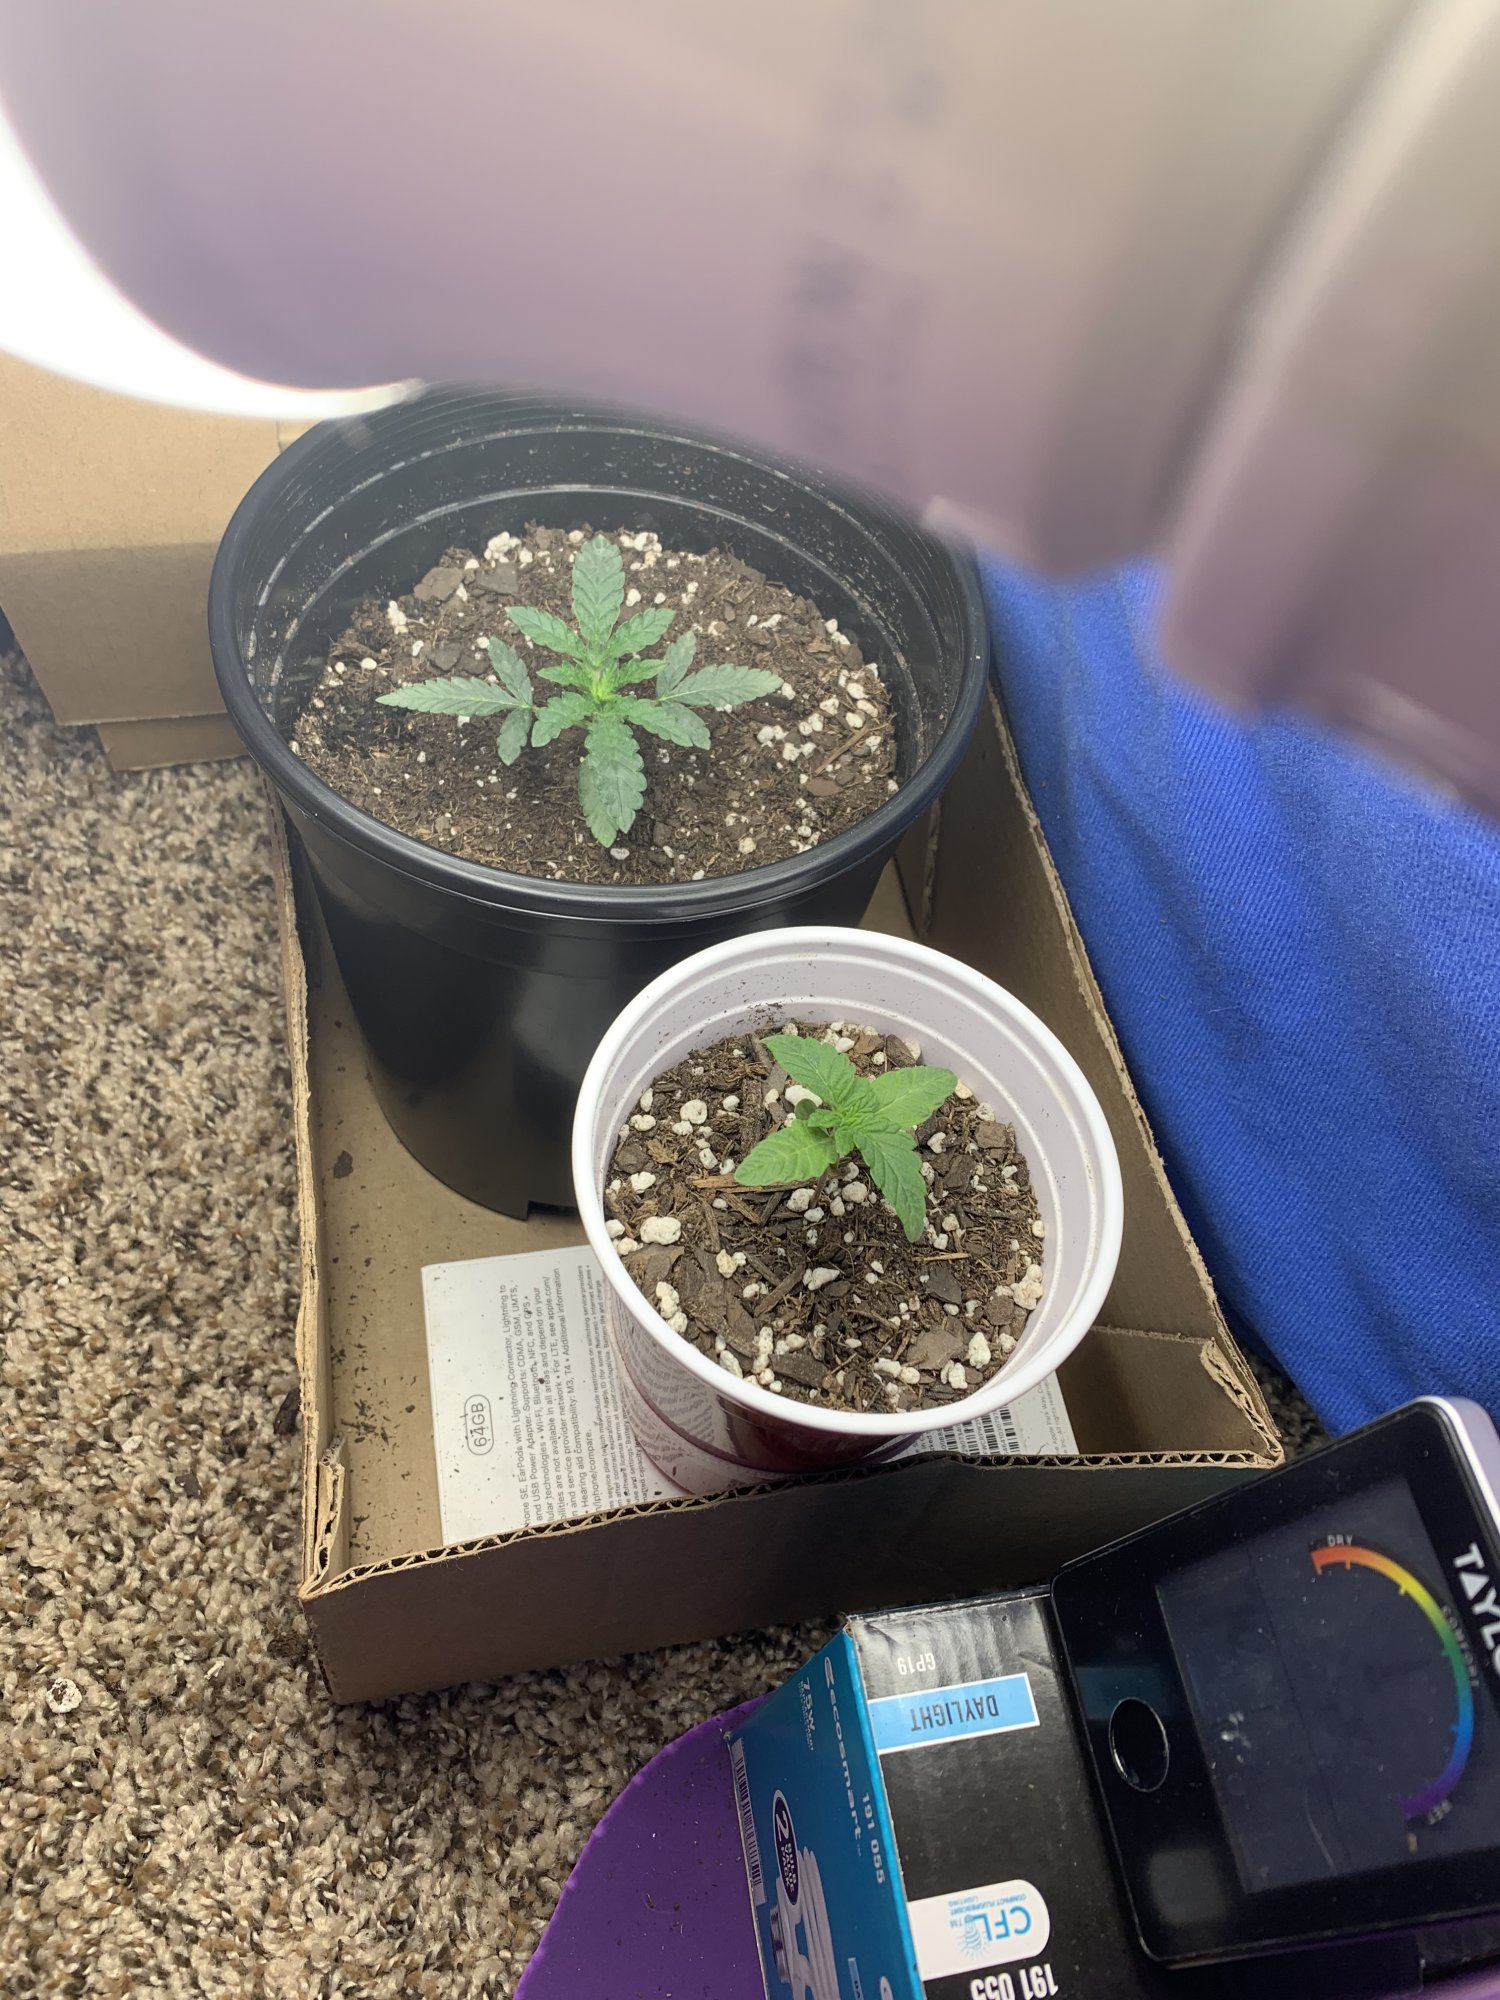 Whats wrong with my seedlings 10